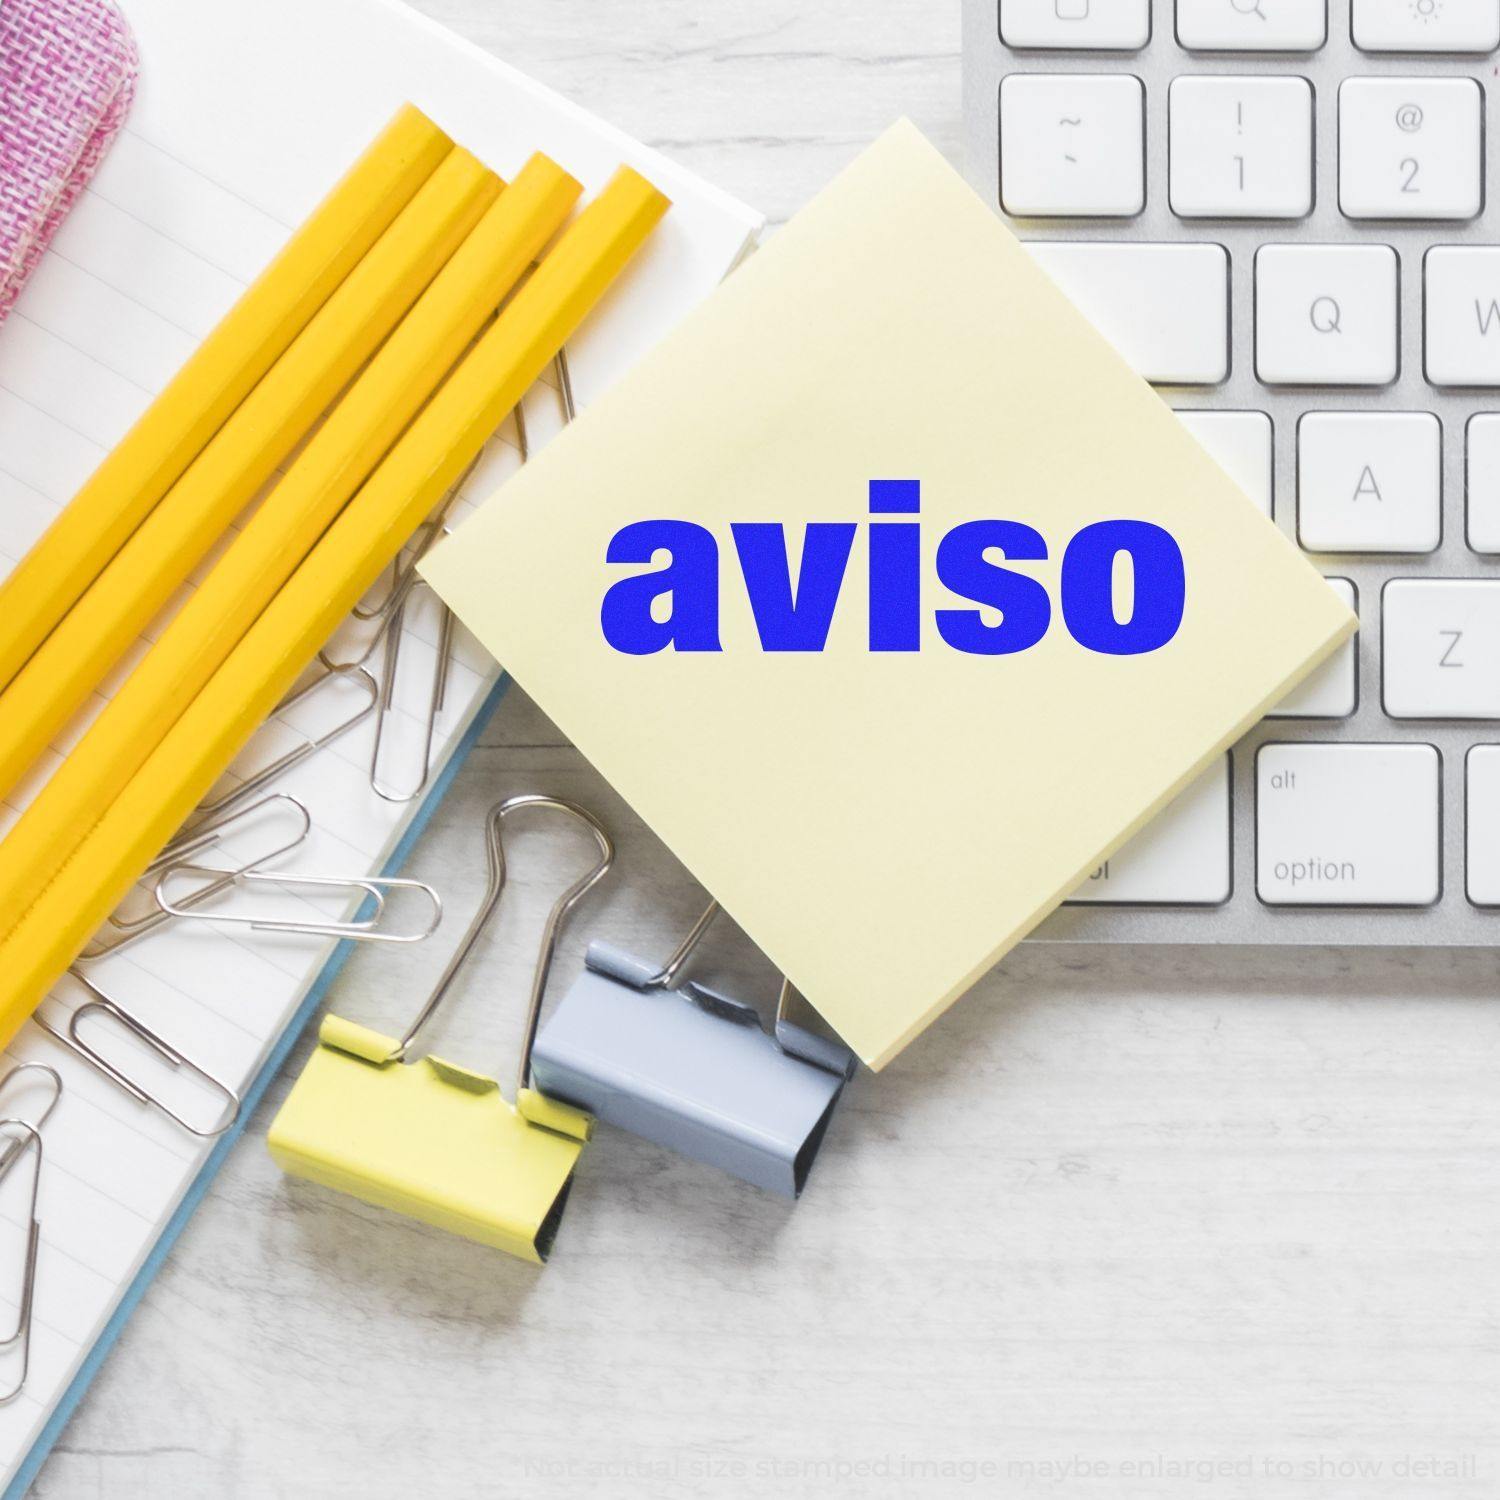 A self-inking stamp with a stamped image showing how the text "aviso" in a large font is displayed by it after stamping.